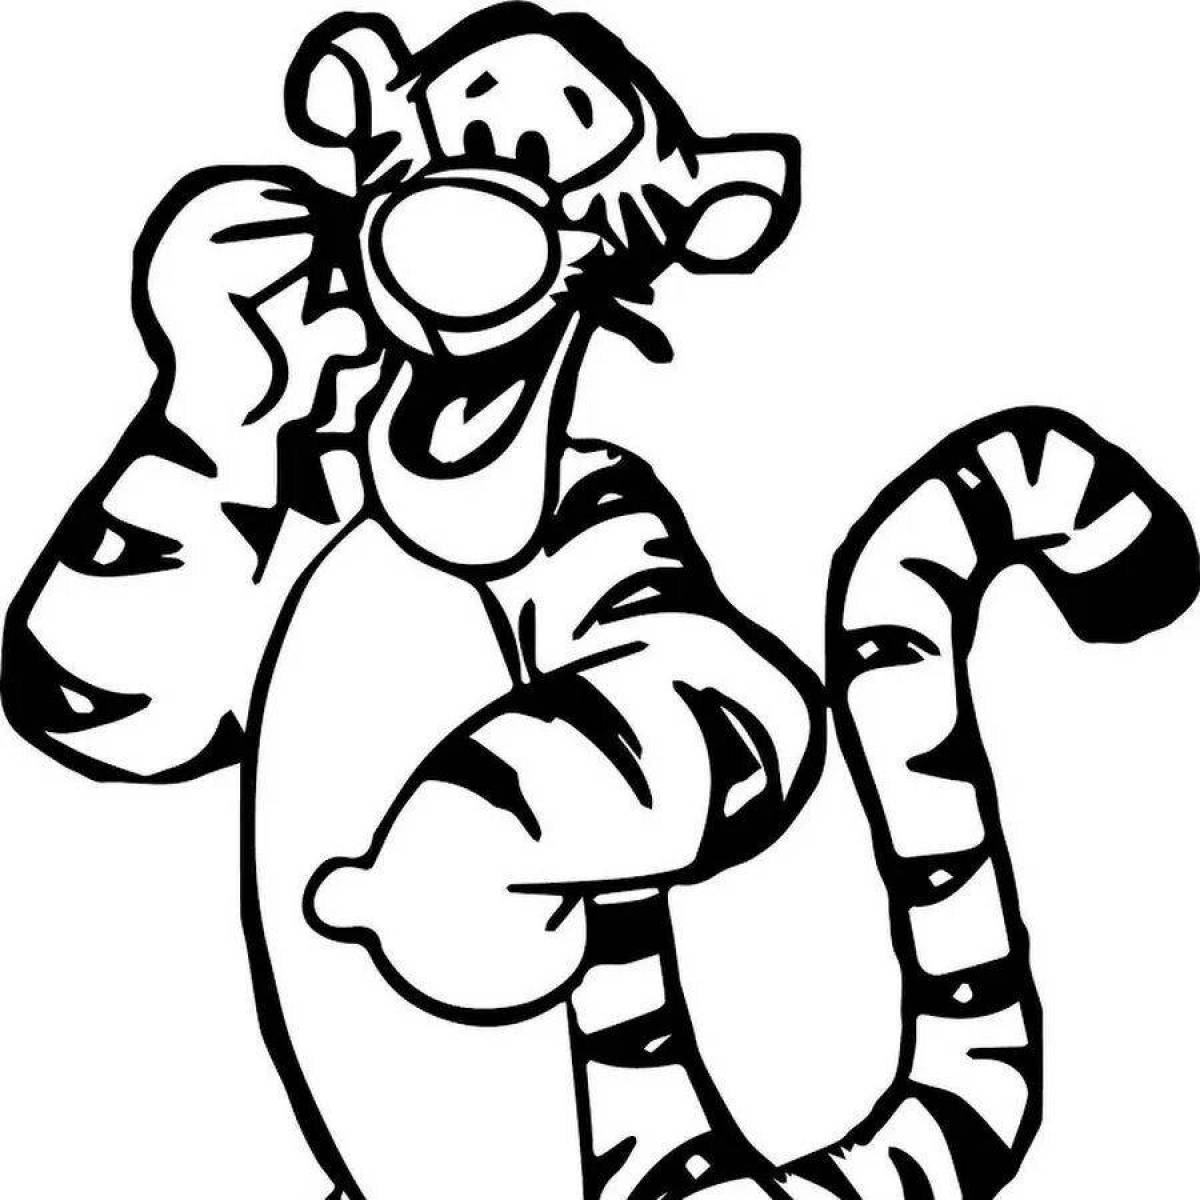 Terrific tiger coloring page